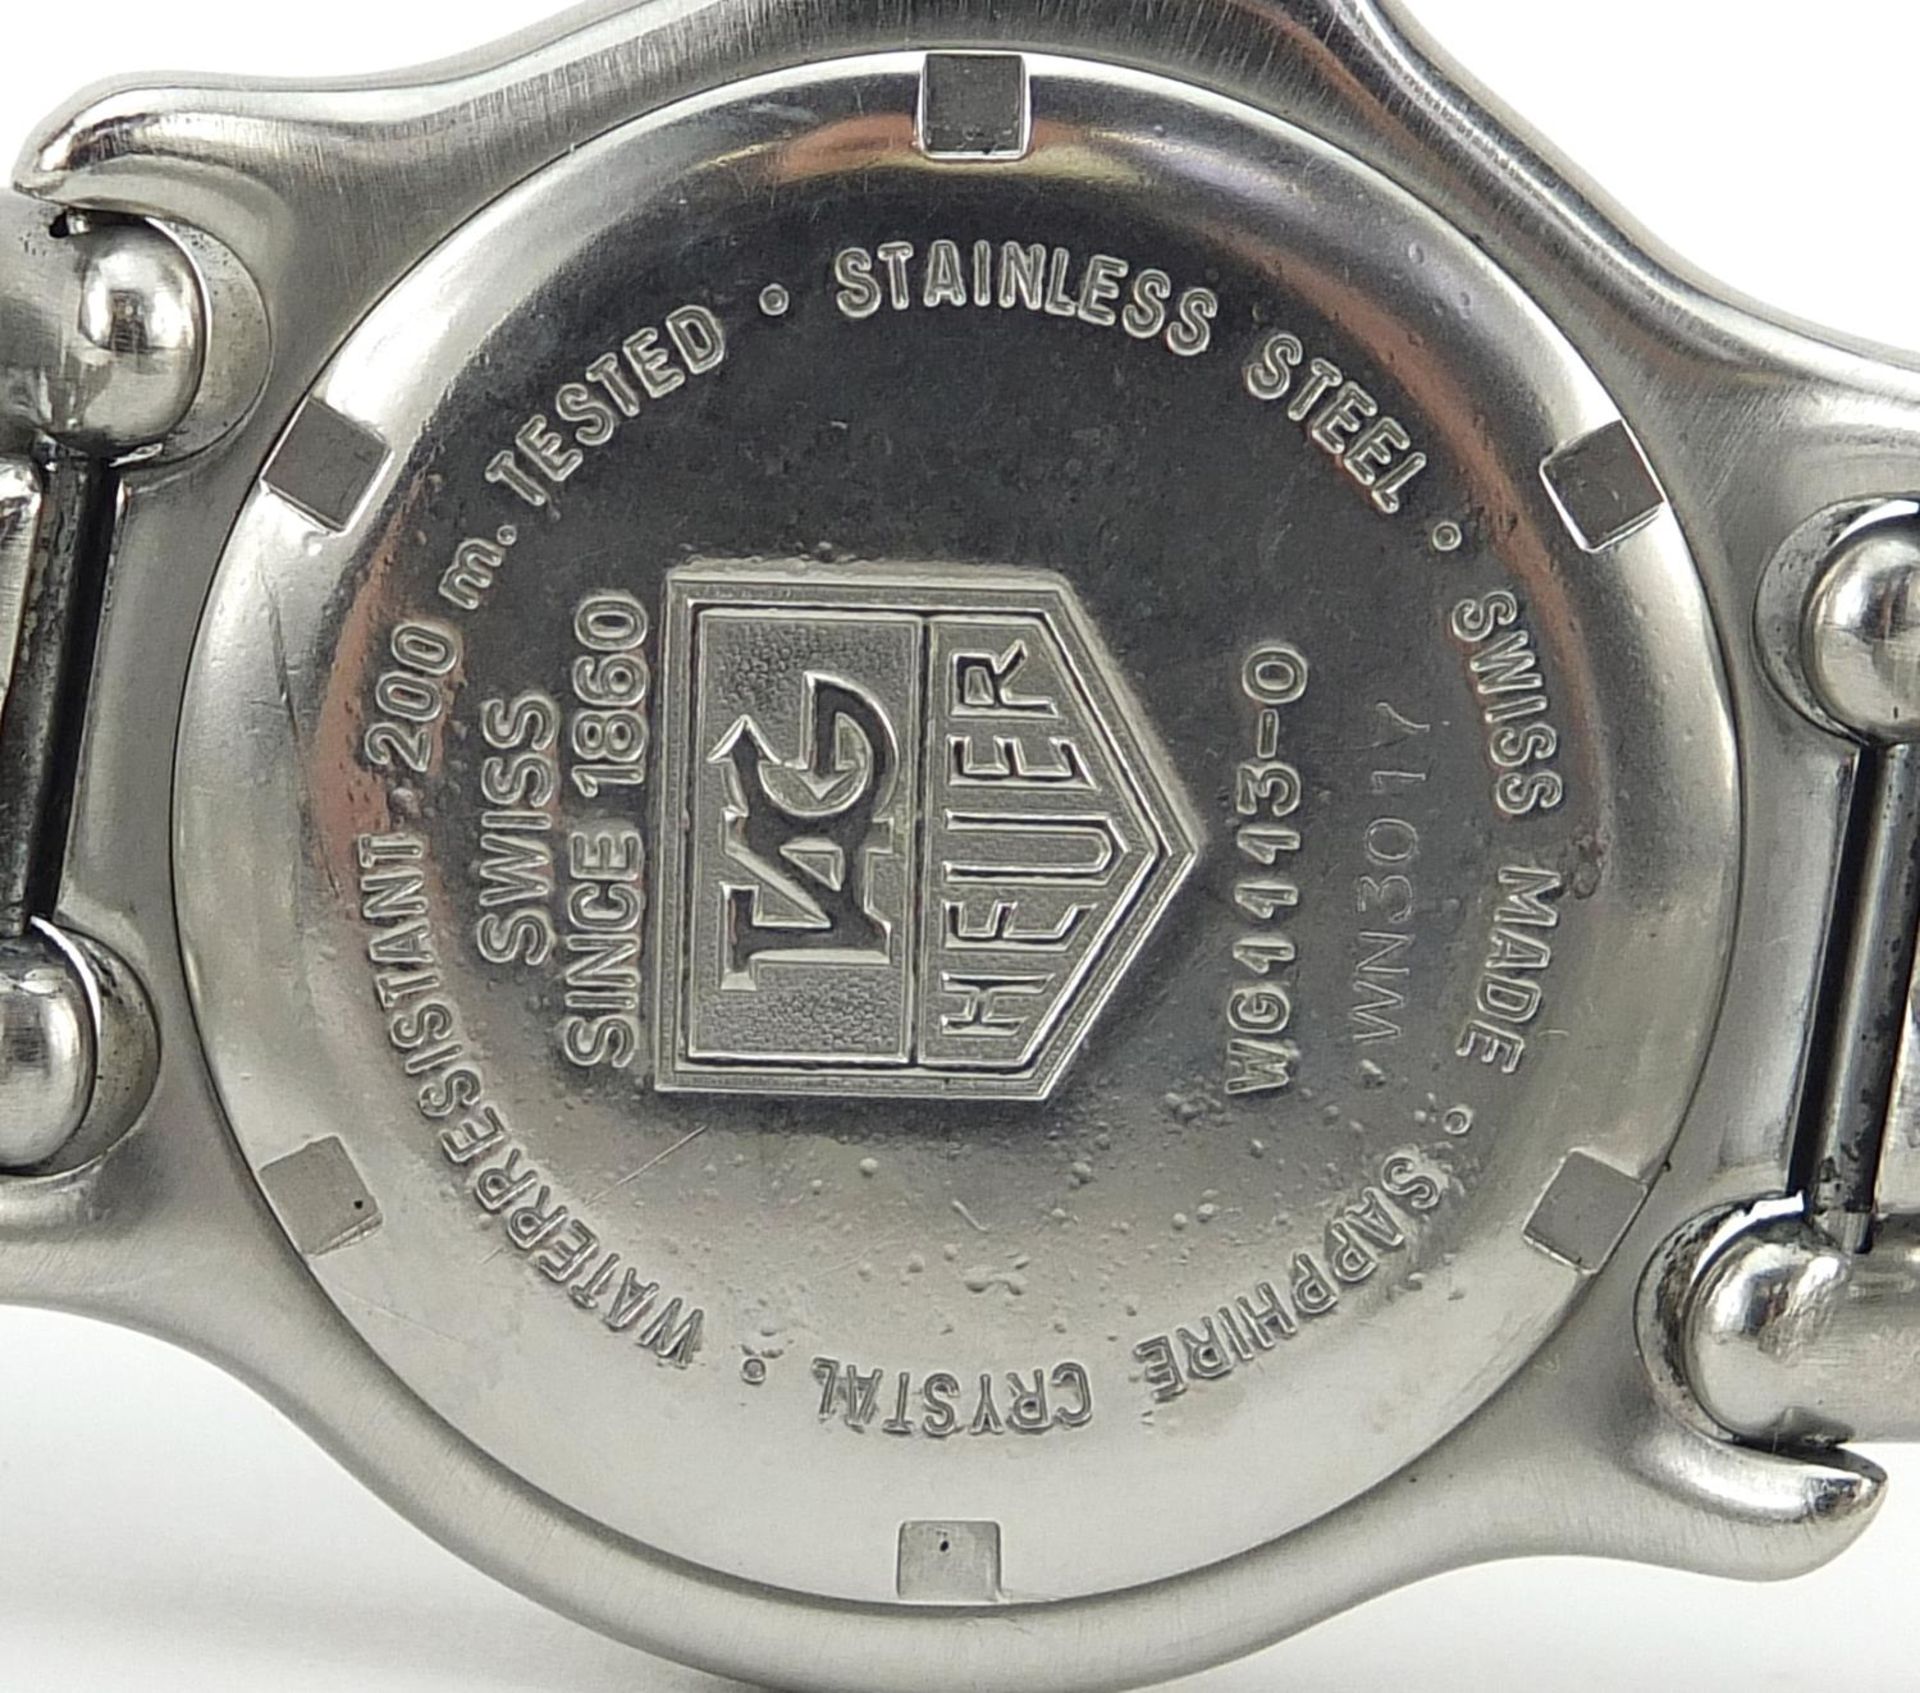 Gentlemen's Tag Heuer Professional wristwatch, the case numbered WG1113-0, with box, the bezel - Image 7 of 8